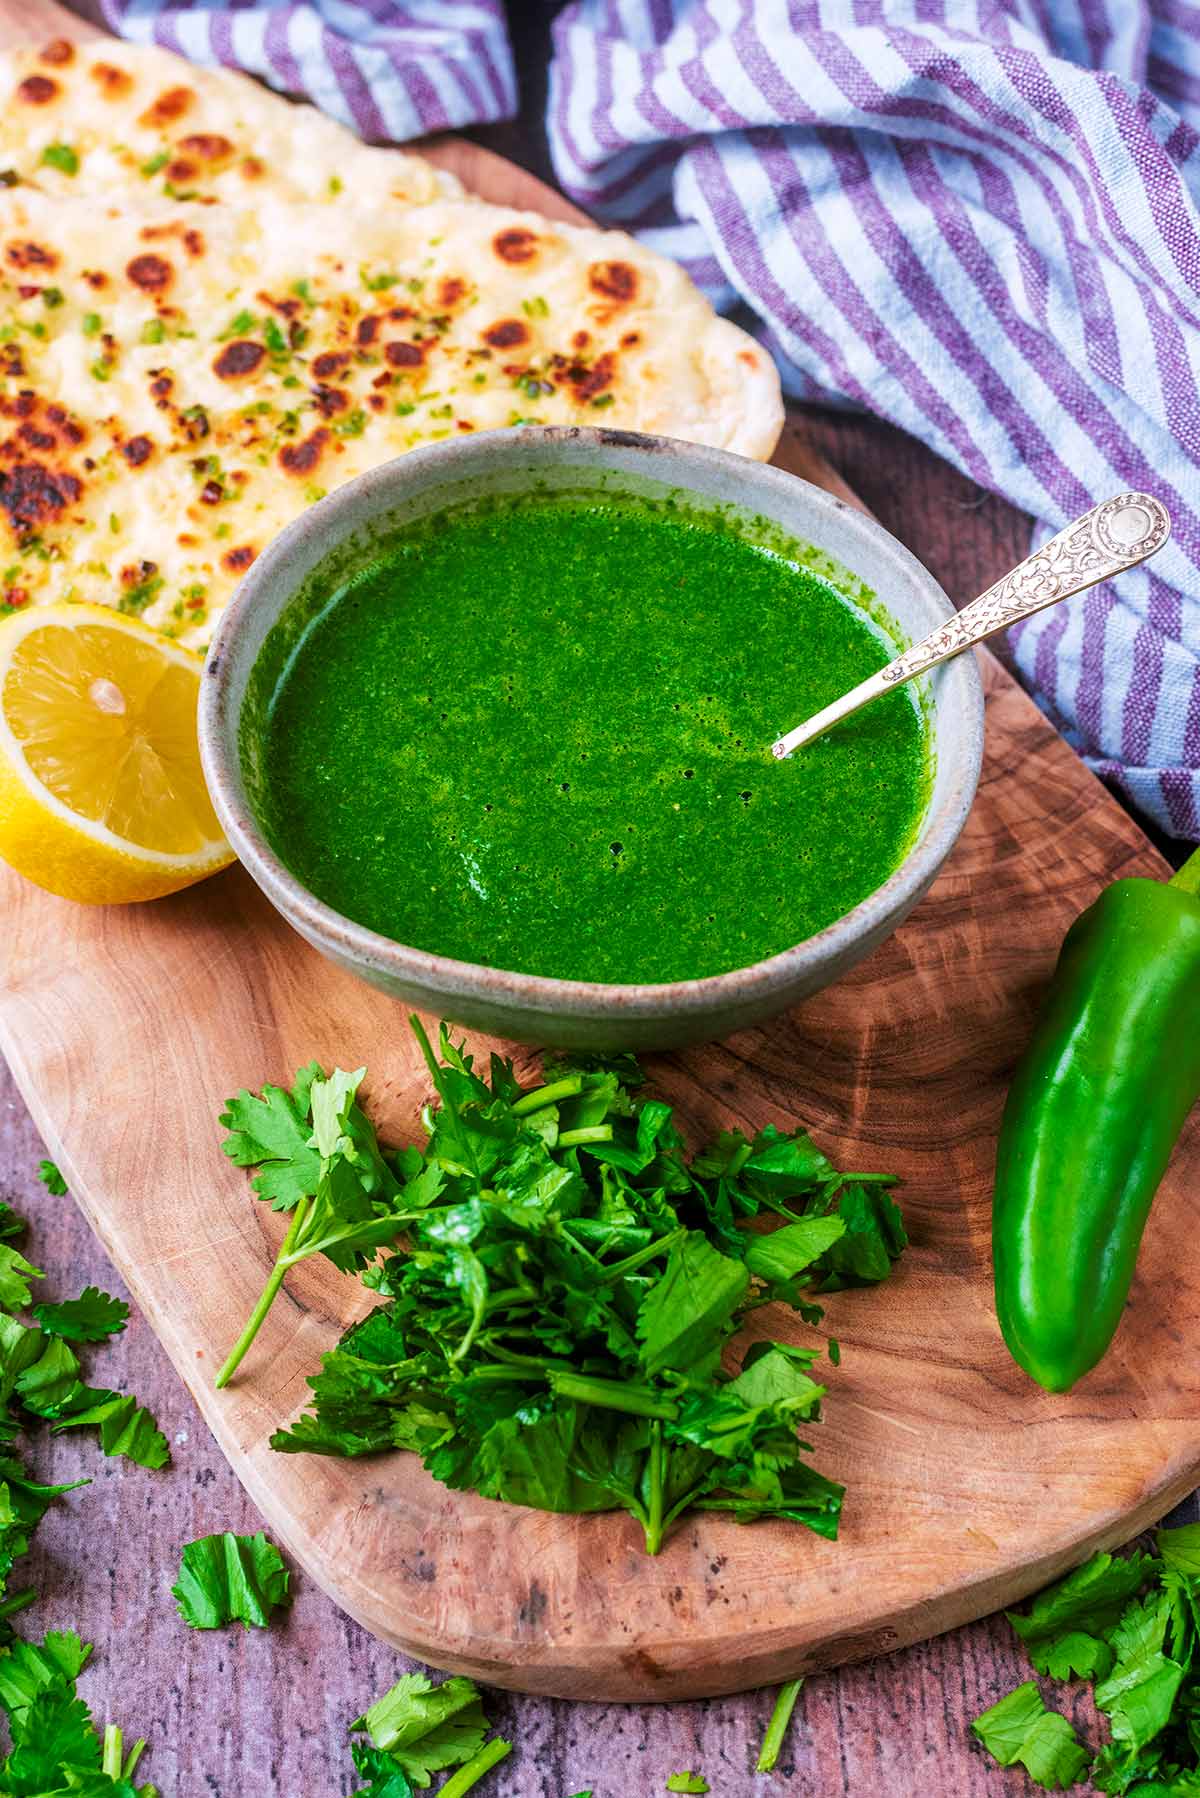 A bowl of green sauce on a board with coriander leaves and a naan bread.